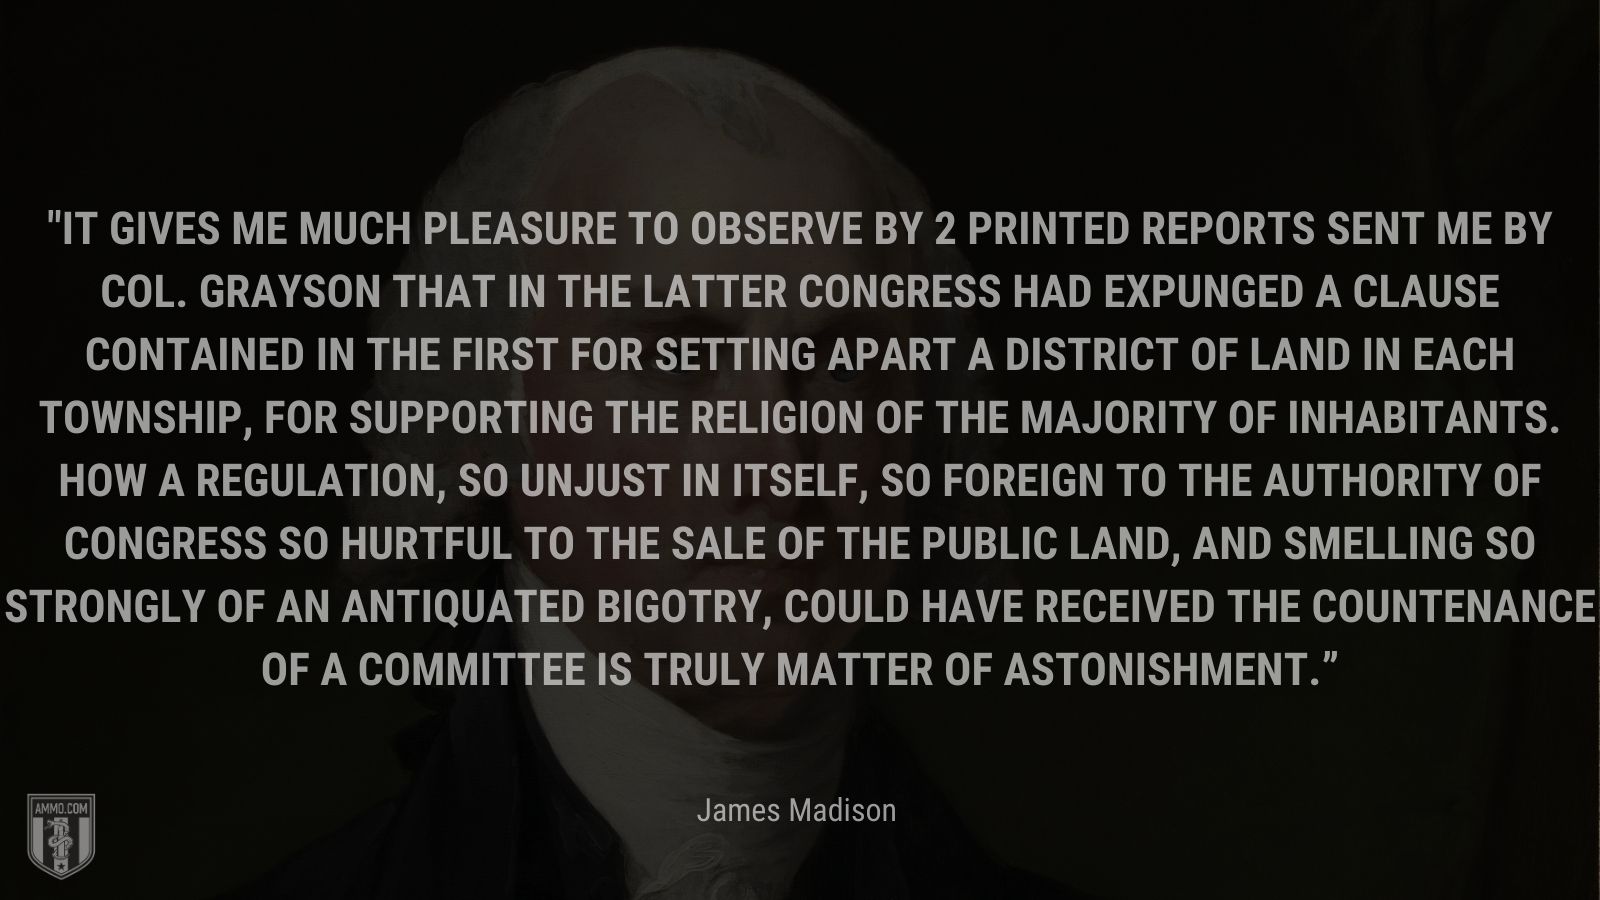 “It gives me much pleasure to observe by 2 printed reports sent me by Col. Grayson that in the latter Congress had expunged a clause contained in the first for setting apart a district of land in each Township, for supporting the Religion of the Majority of inhabitants. How a regulation, so unjust in itself, so foreign to the Authority of Congress so hurtful to the sale of the public land, and smelling so strongly of an antiquated Bigotry, could have received the countenance of a Committee is truly matter of astonishment.” - James Madison